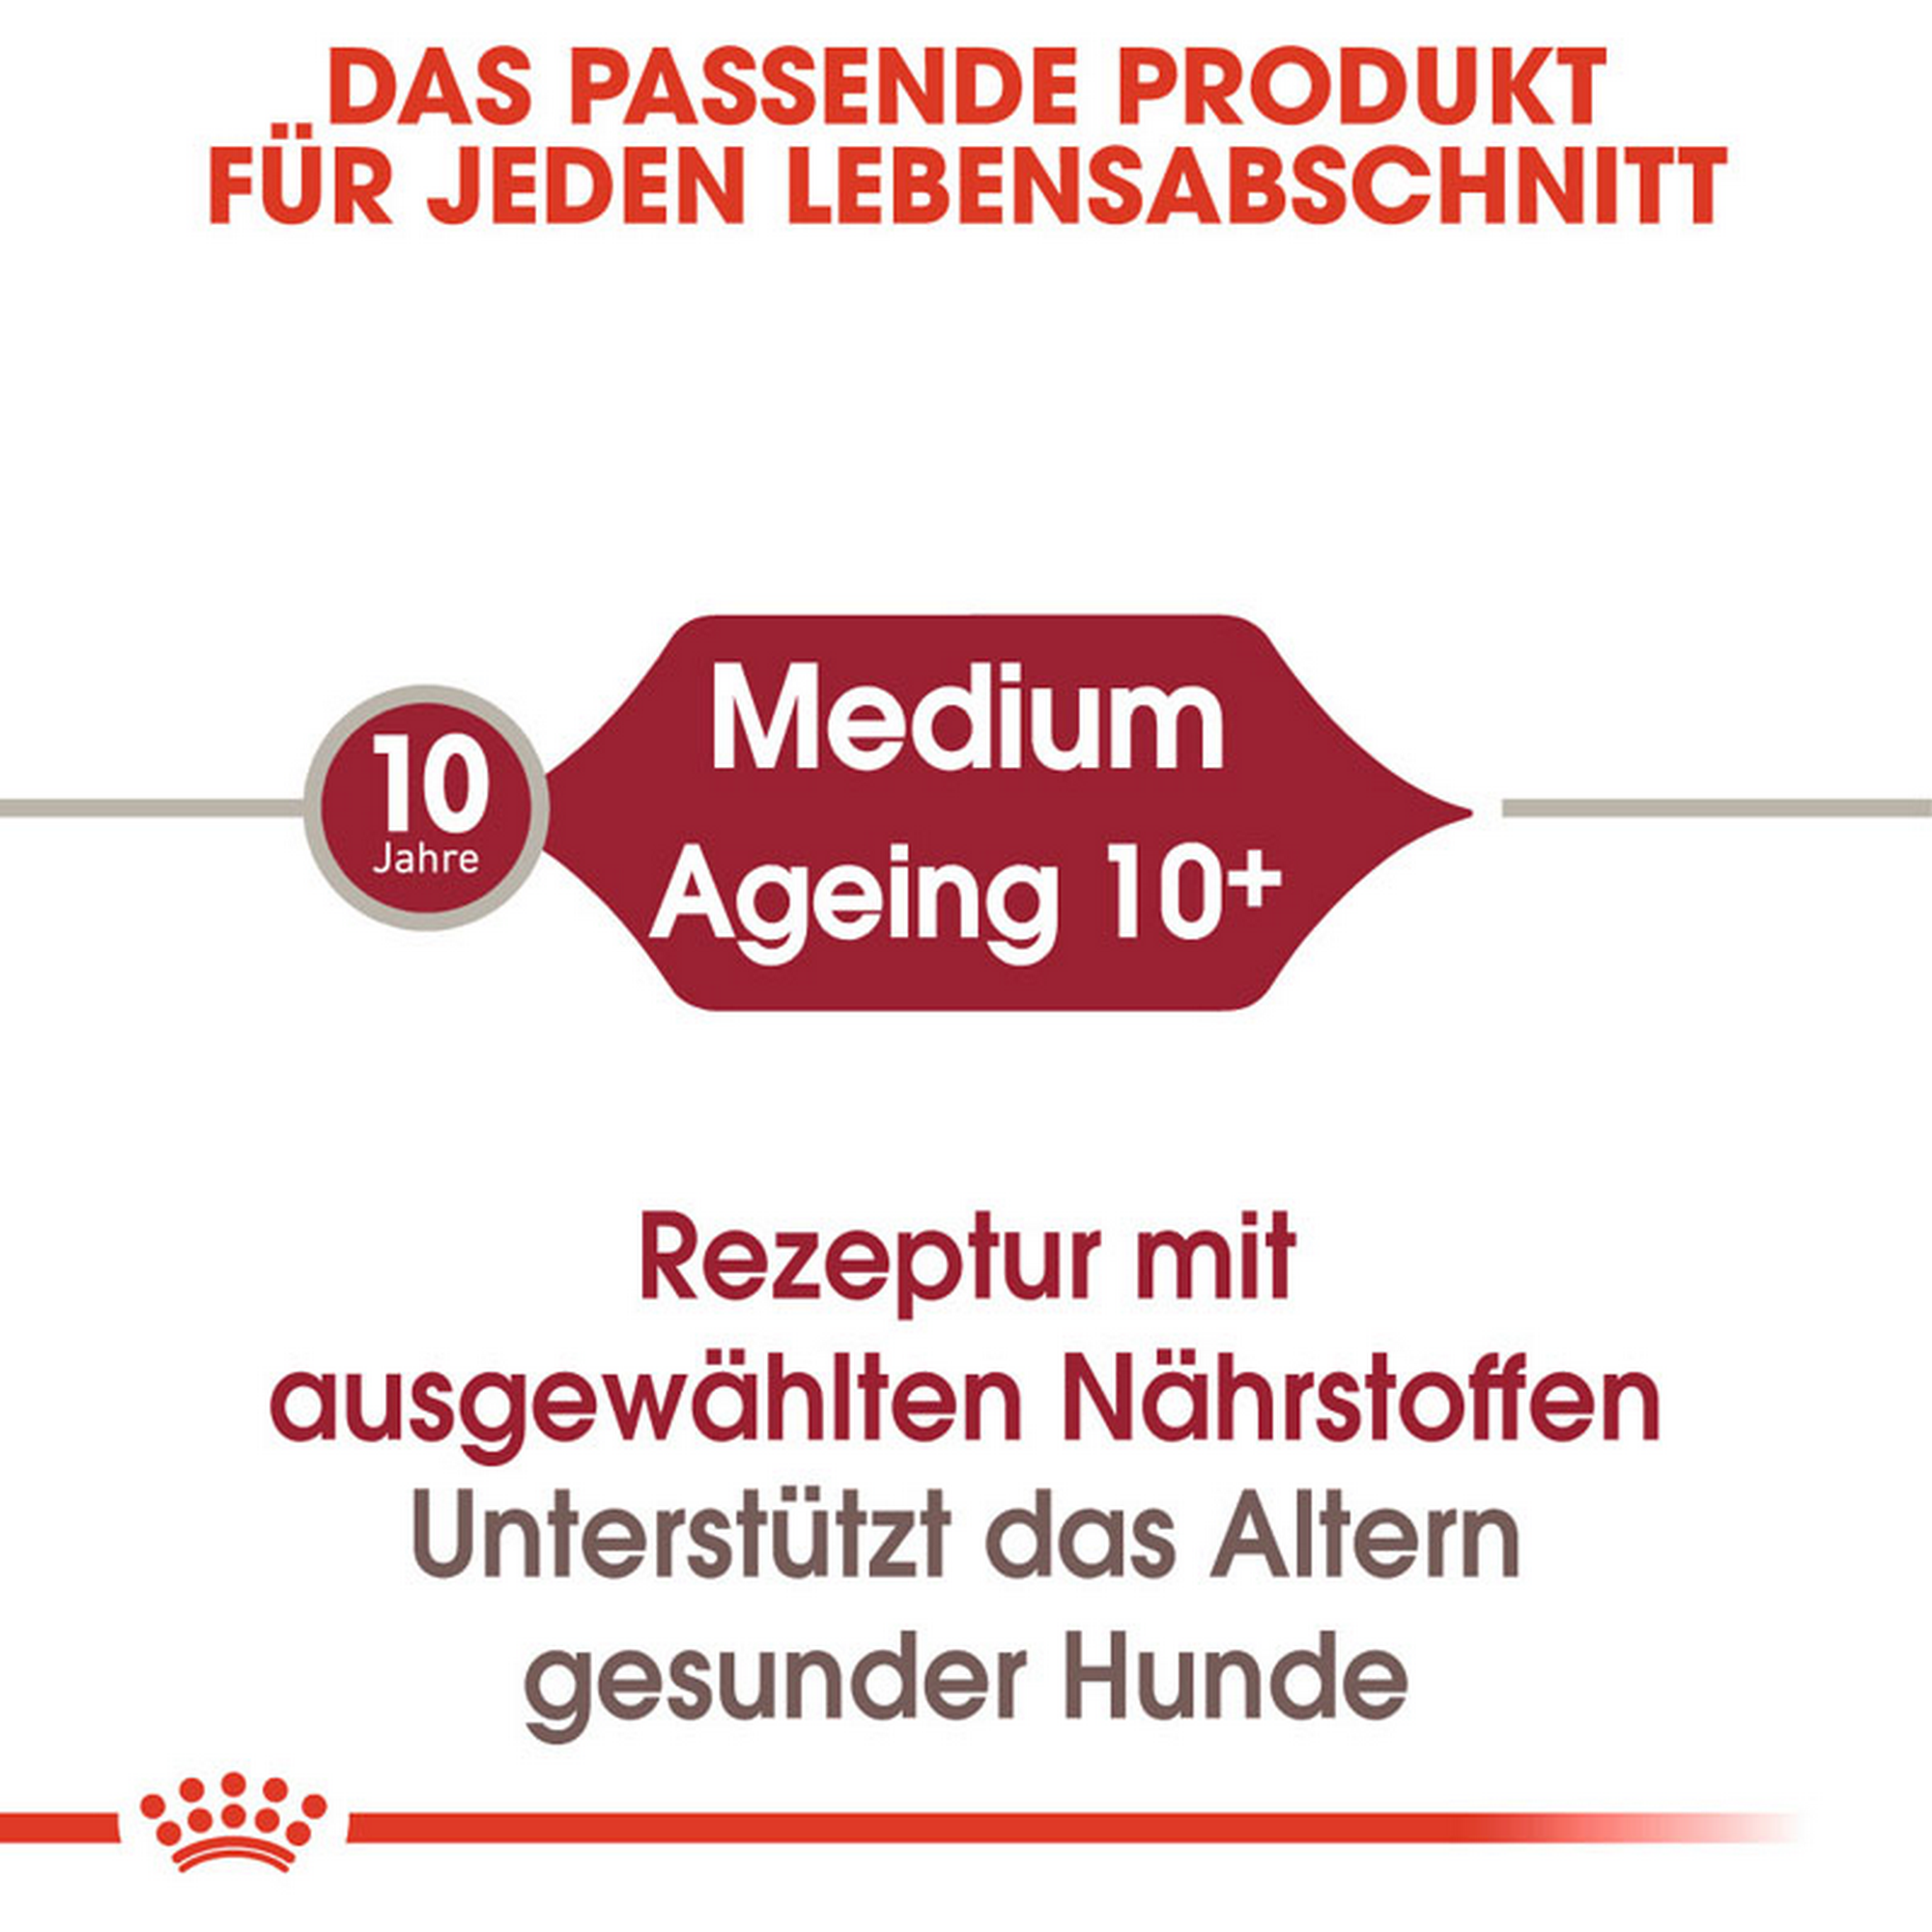 ROYAL CANIN MEDIUM AGEING 10+ Nassfutter für ältere mittelgroße Hunde + product picture